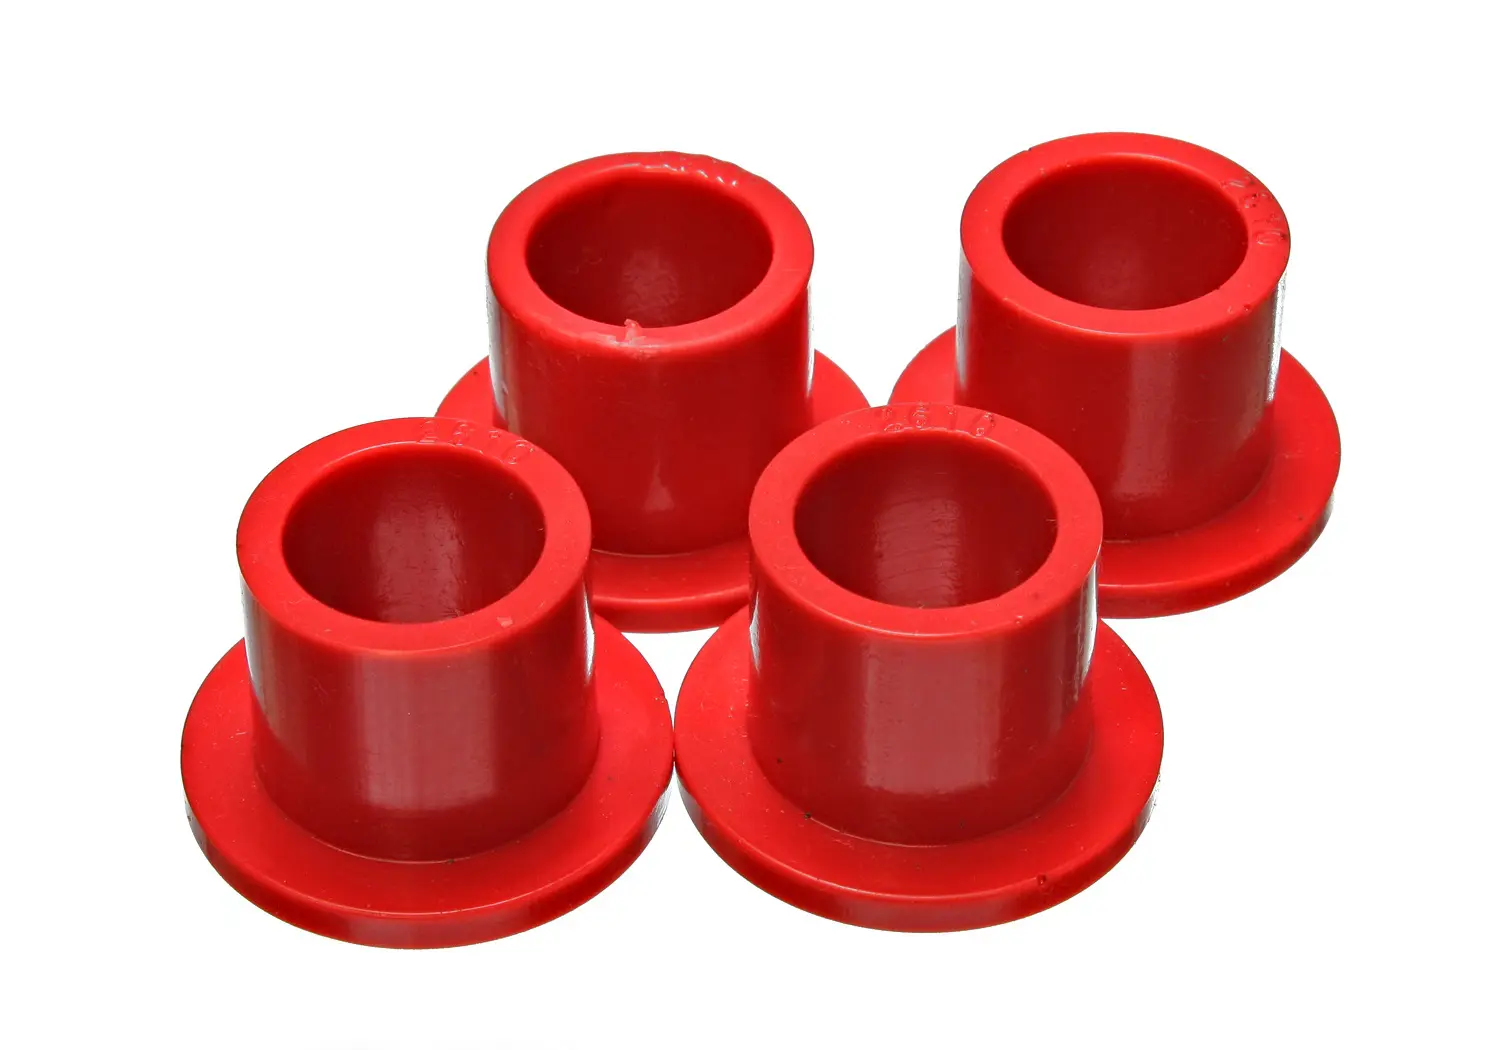 A group of four red plastic cups sitting on top of each other.